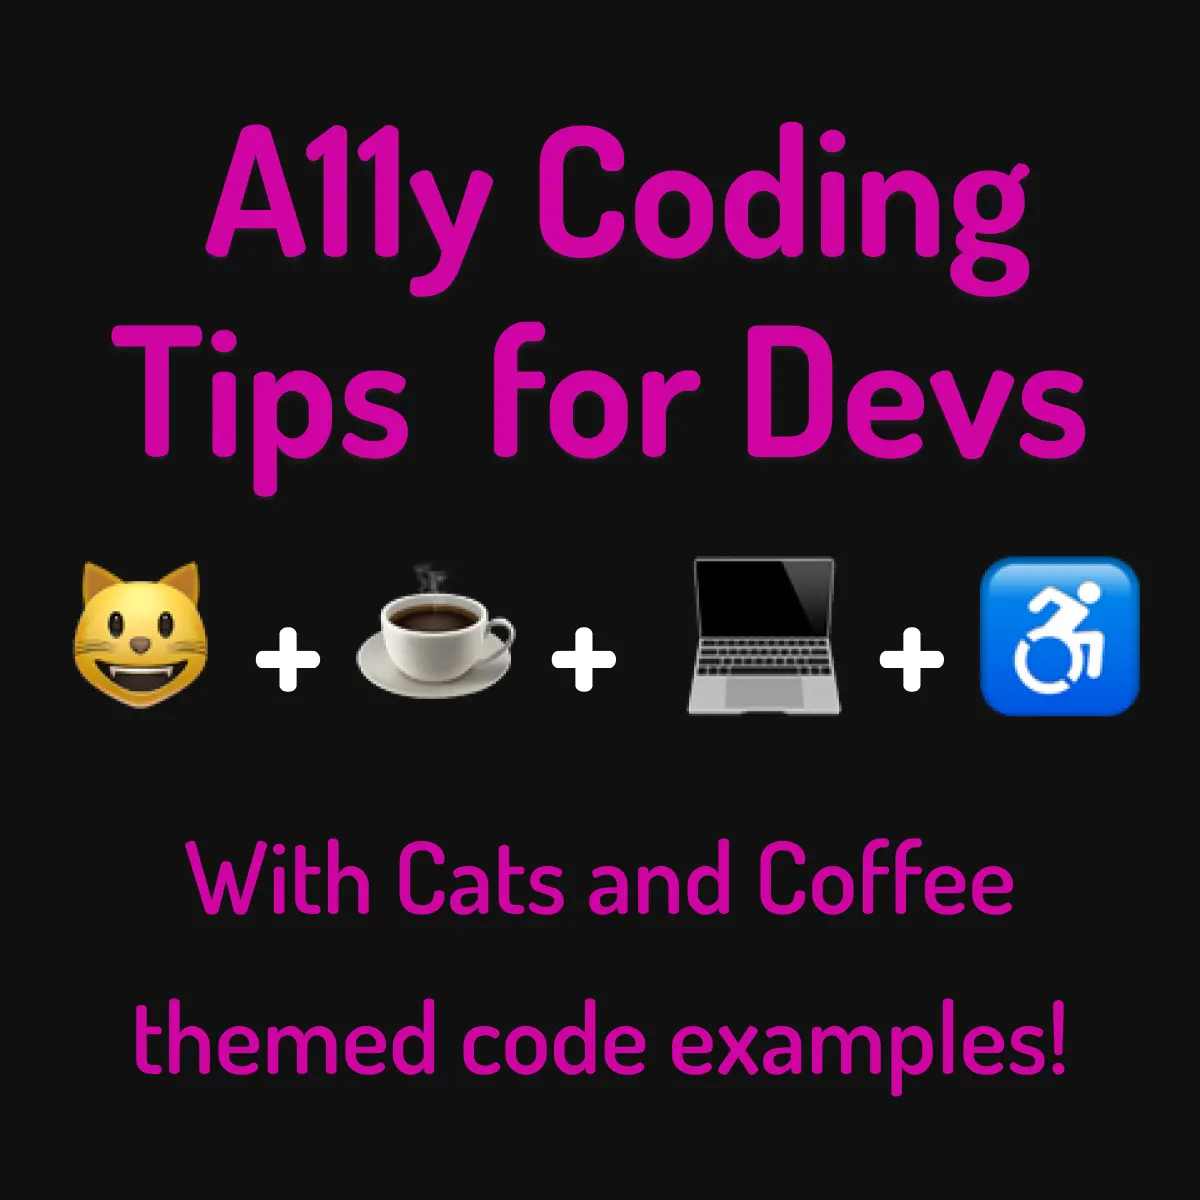 'Graphic with hot pink text on a black background. The top text says A11y Tips for Devs. Then there's a row of emojis with plus signs between them: happy cat face + cup of coffee + laptop _ active wheelchair user symbol. The bottom text says With Cat and Coffee themed code examples!'